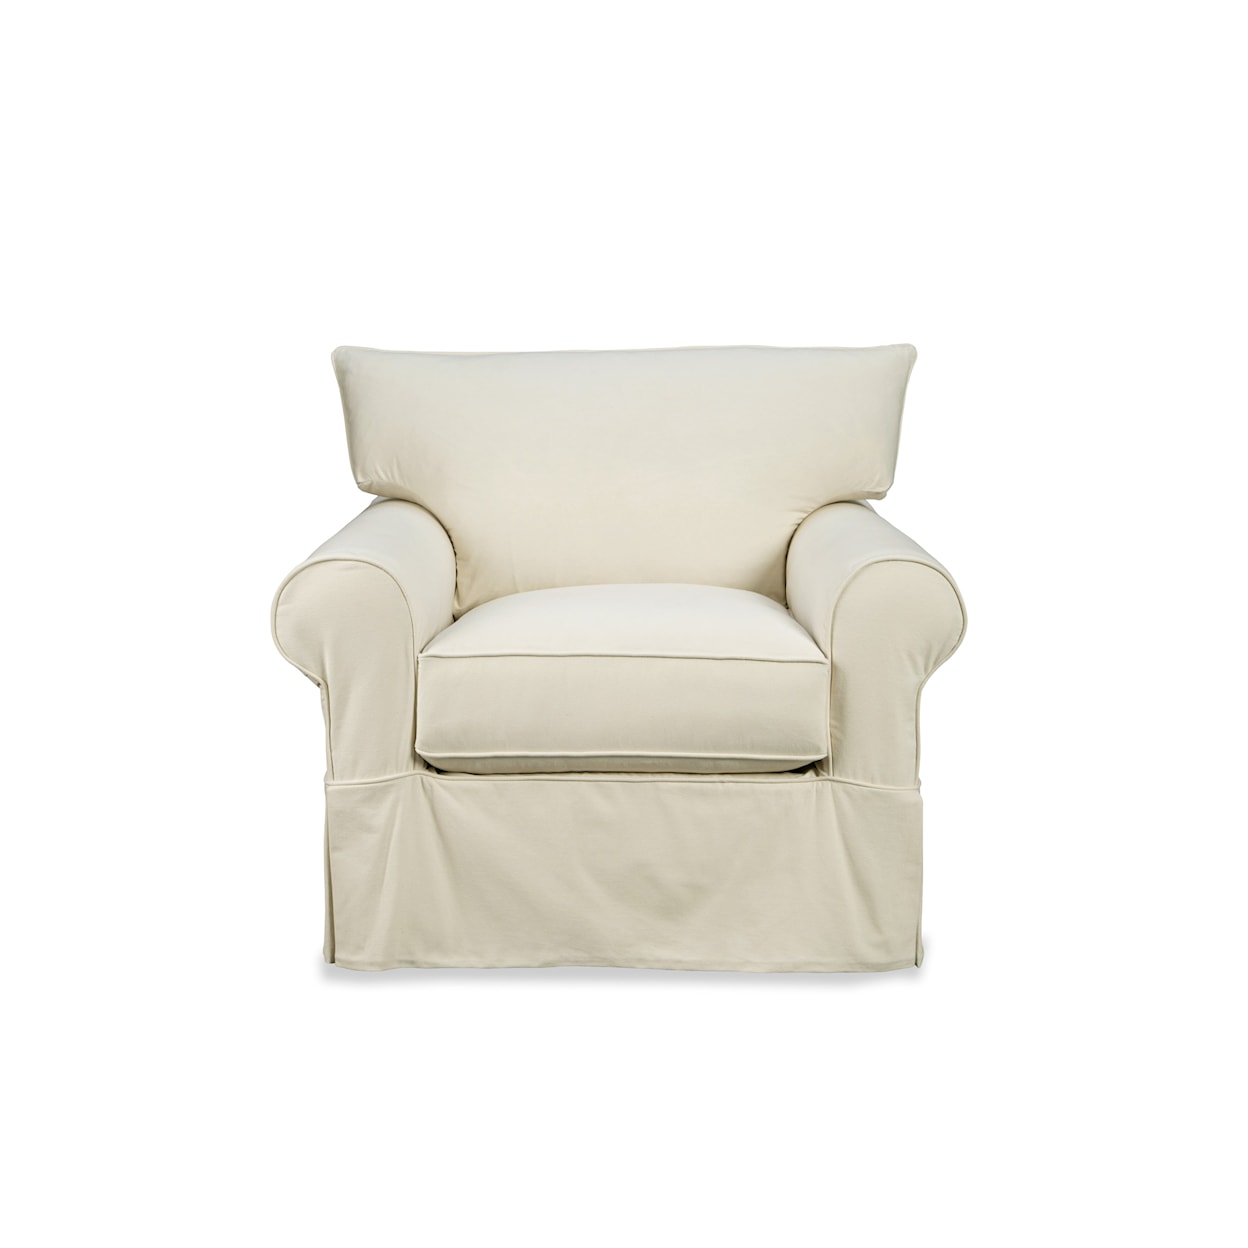 Craftmaster 936450BD Slipcover Chair